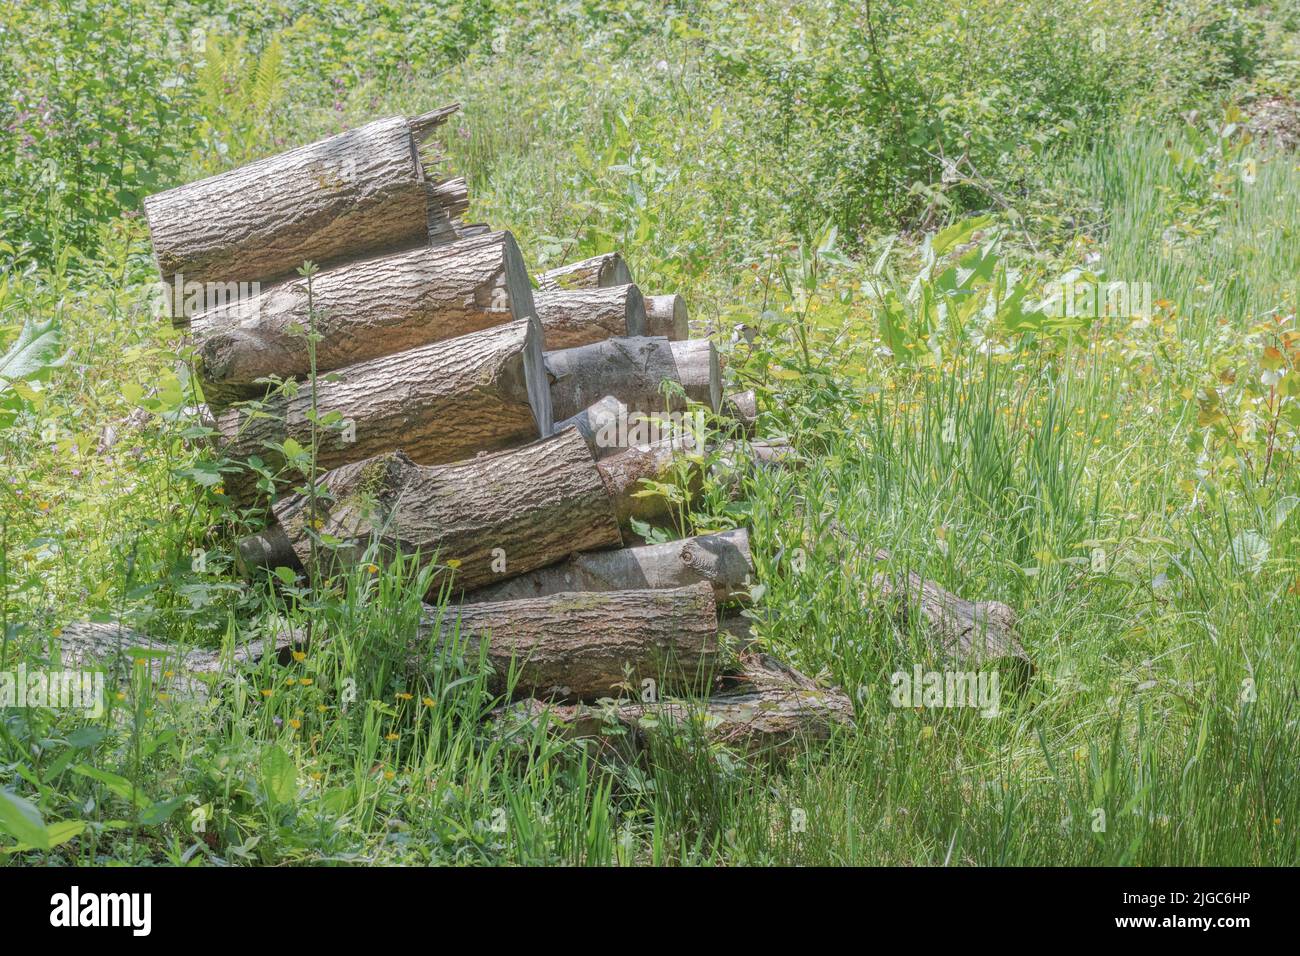 Forgotten overgrown pile of old logs in UK woodland countryside area on a sunny day. Possibly for winter fuel topic, rustic woodpile Stock Photo